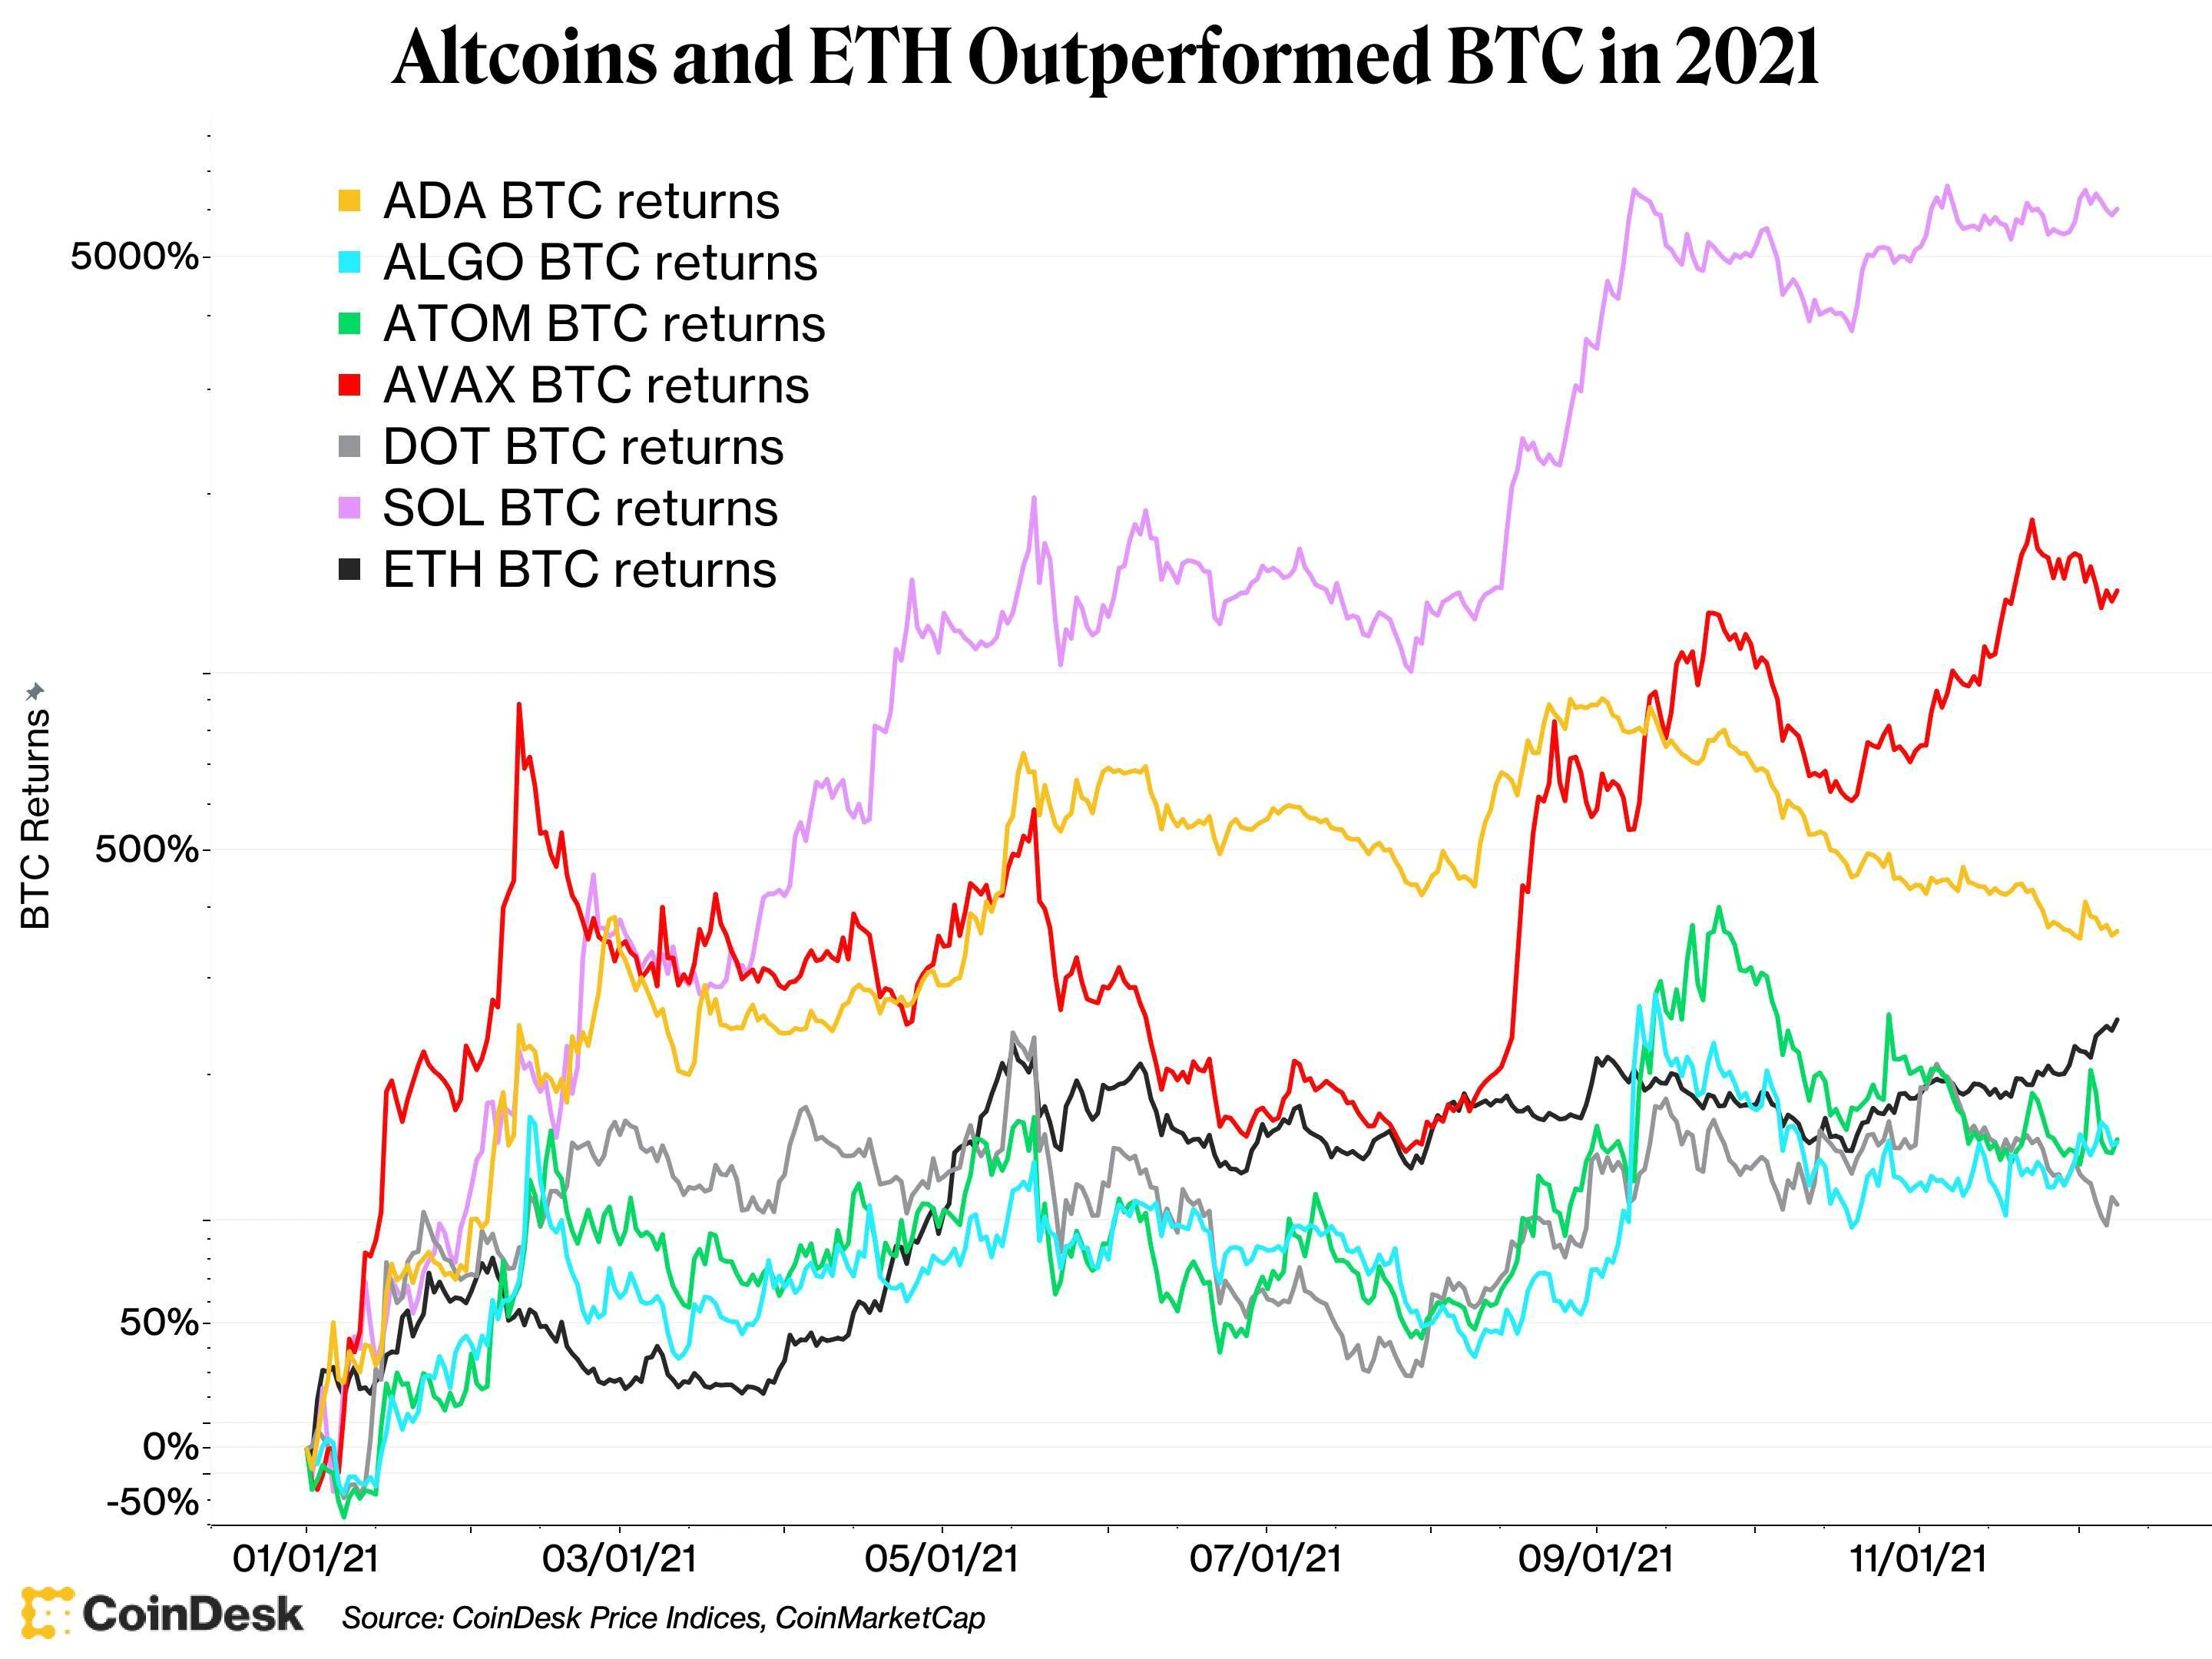 Altcoins and Ether year-to-date returns, priced in bitcoin (logarithmic scale).